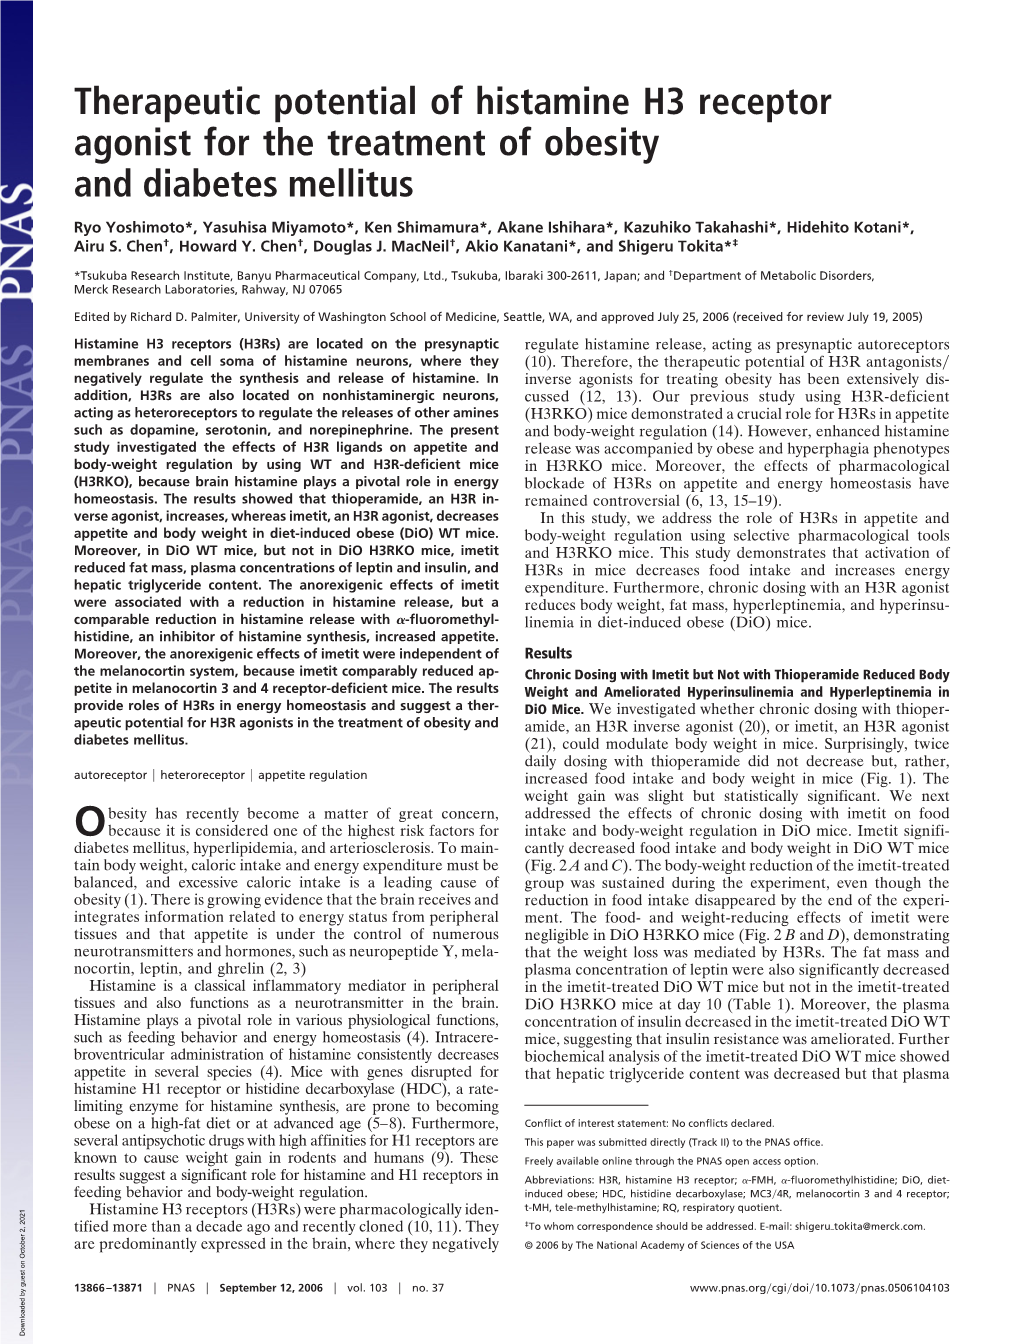 Therapeutic Potential of Histamine H3 Receptor Agonist for the Treatment of Obesity and Diabetes Mellitus